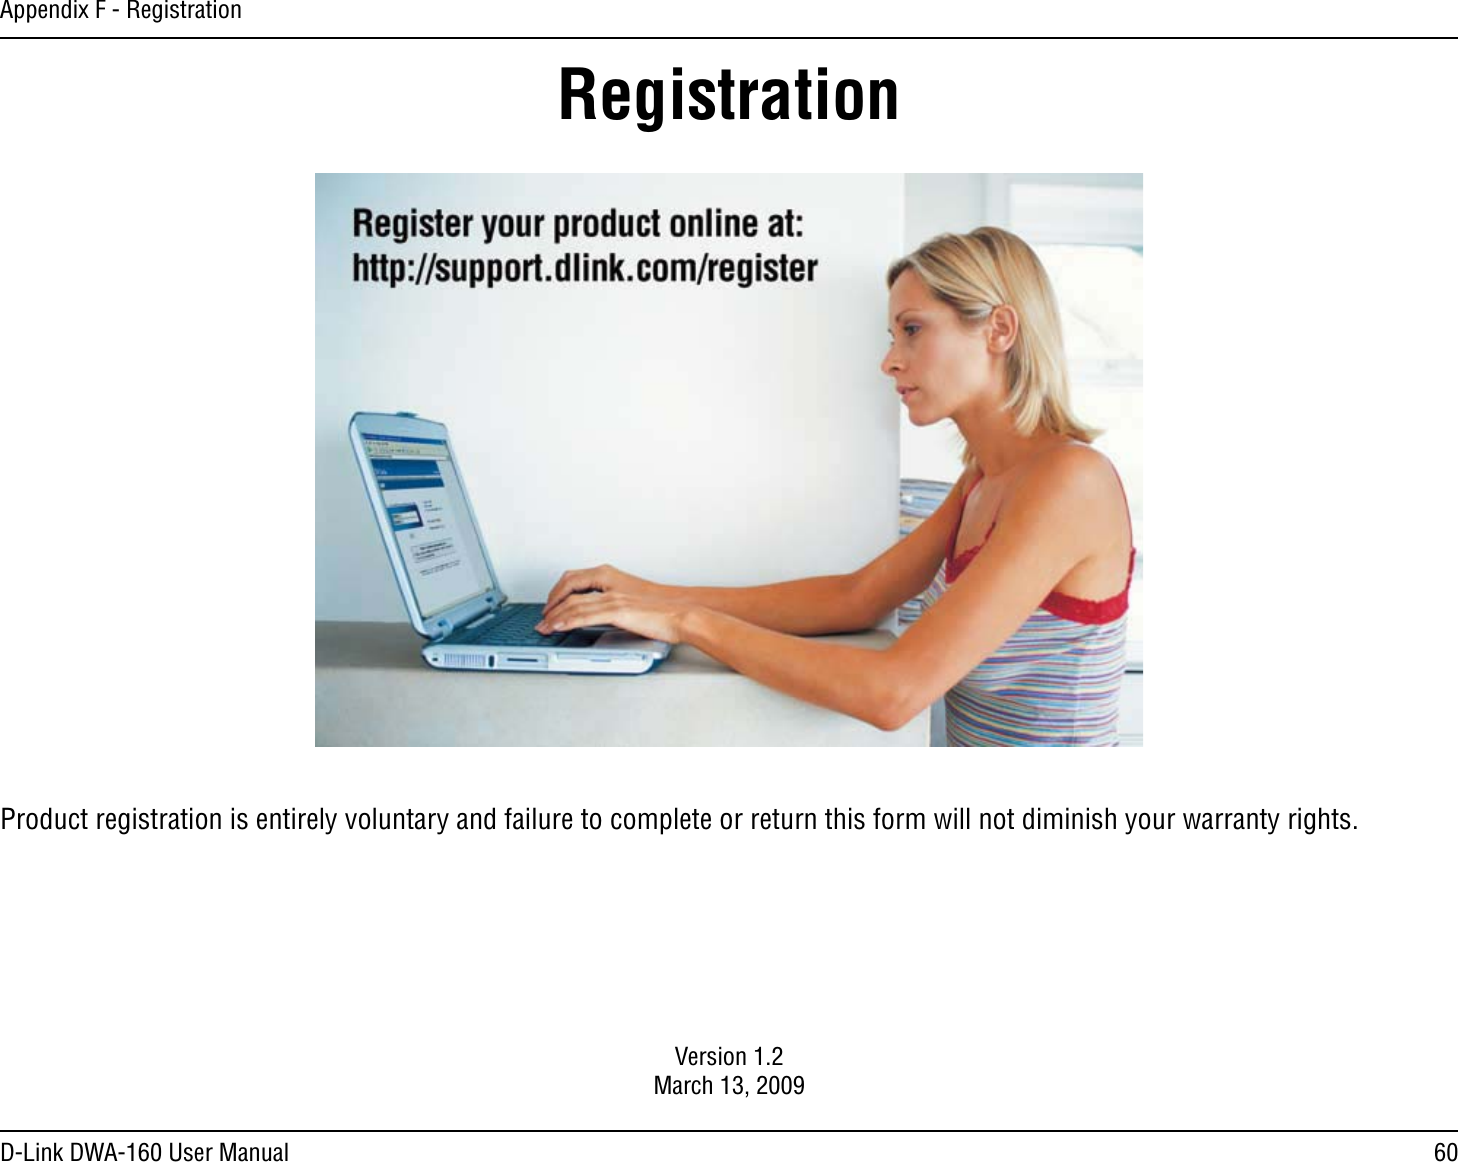 60D-Link DWA-160 User ManualAppendix F - RegistrationVersion 1.2March 13, 2009Product registration is entirely voluntary and failure to complete or return this form will not diminish your warranty rights.Registration